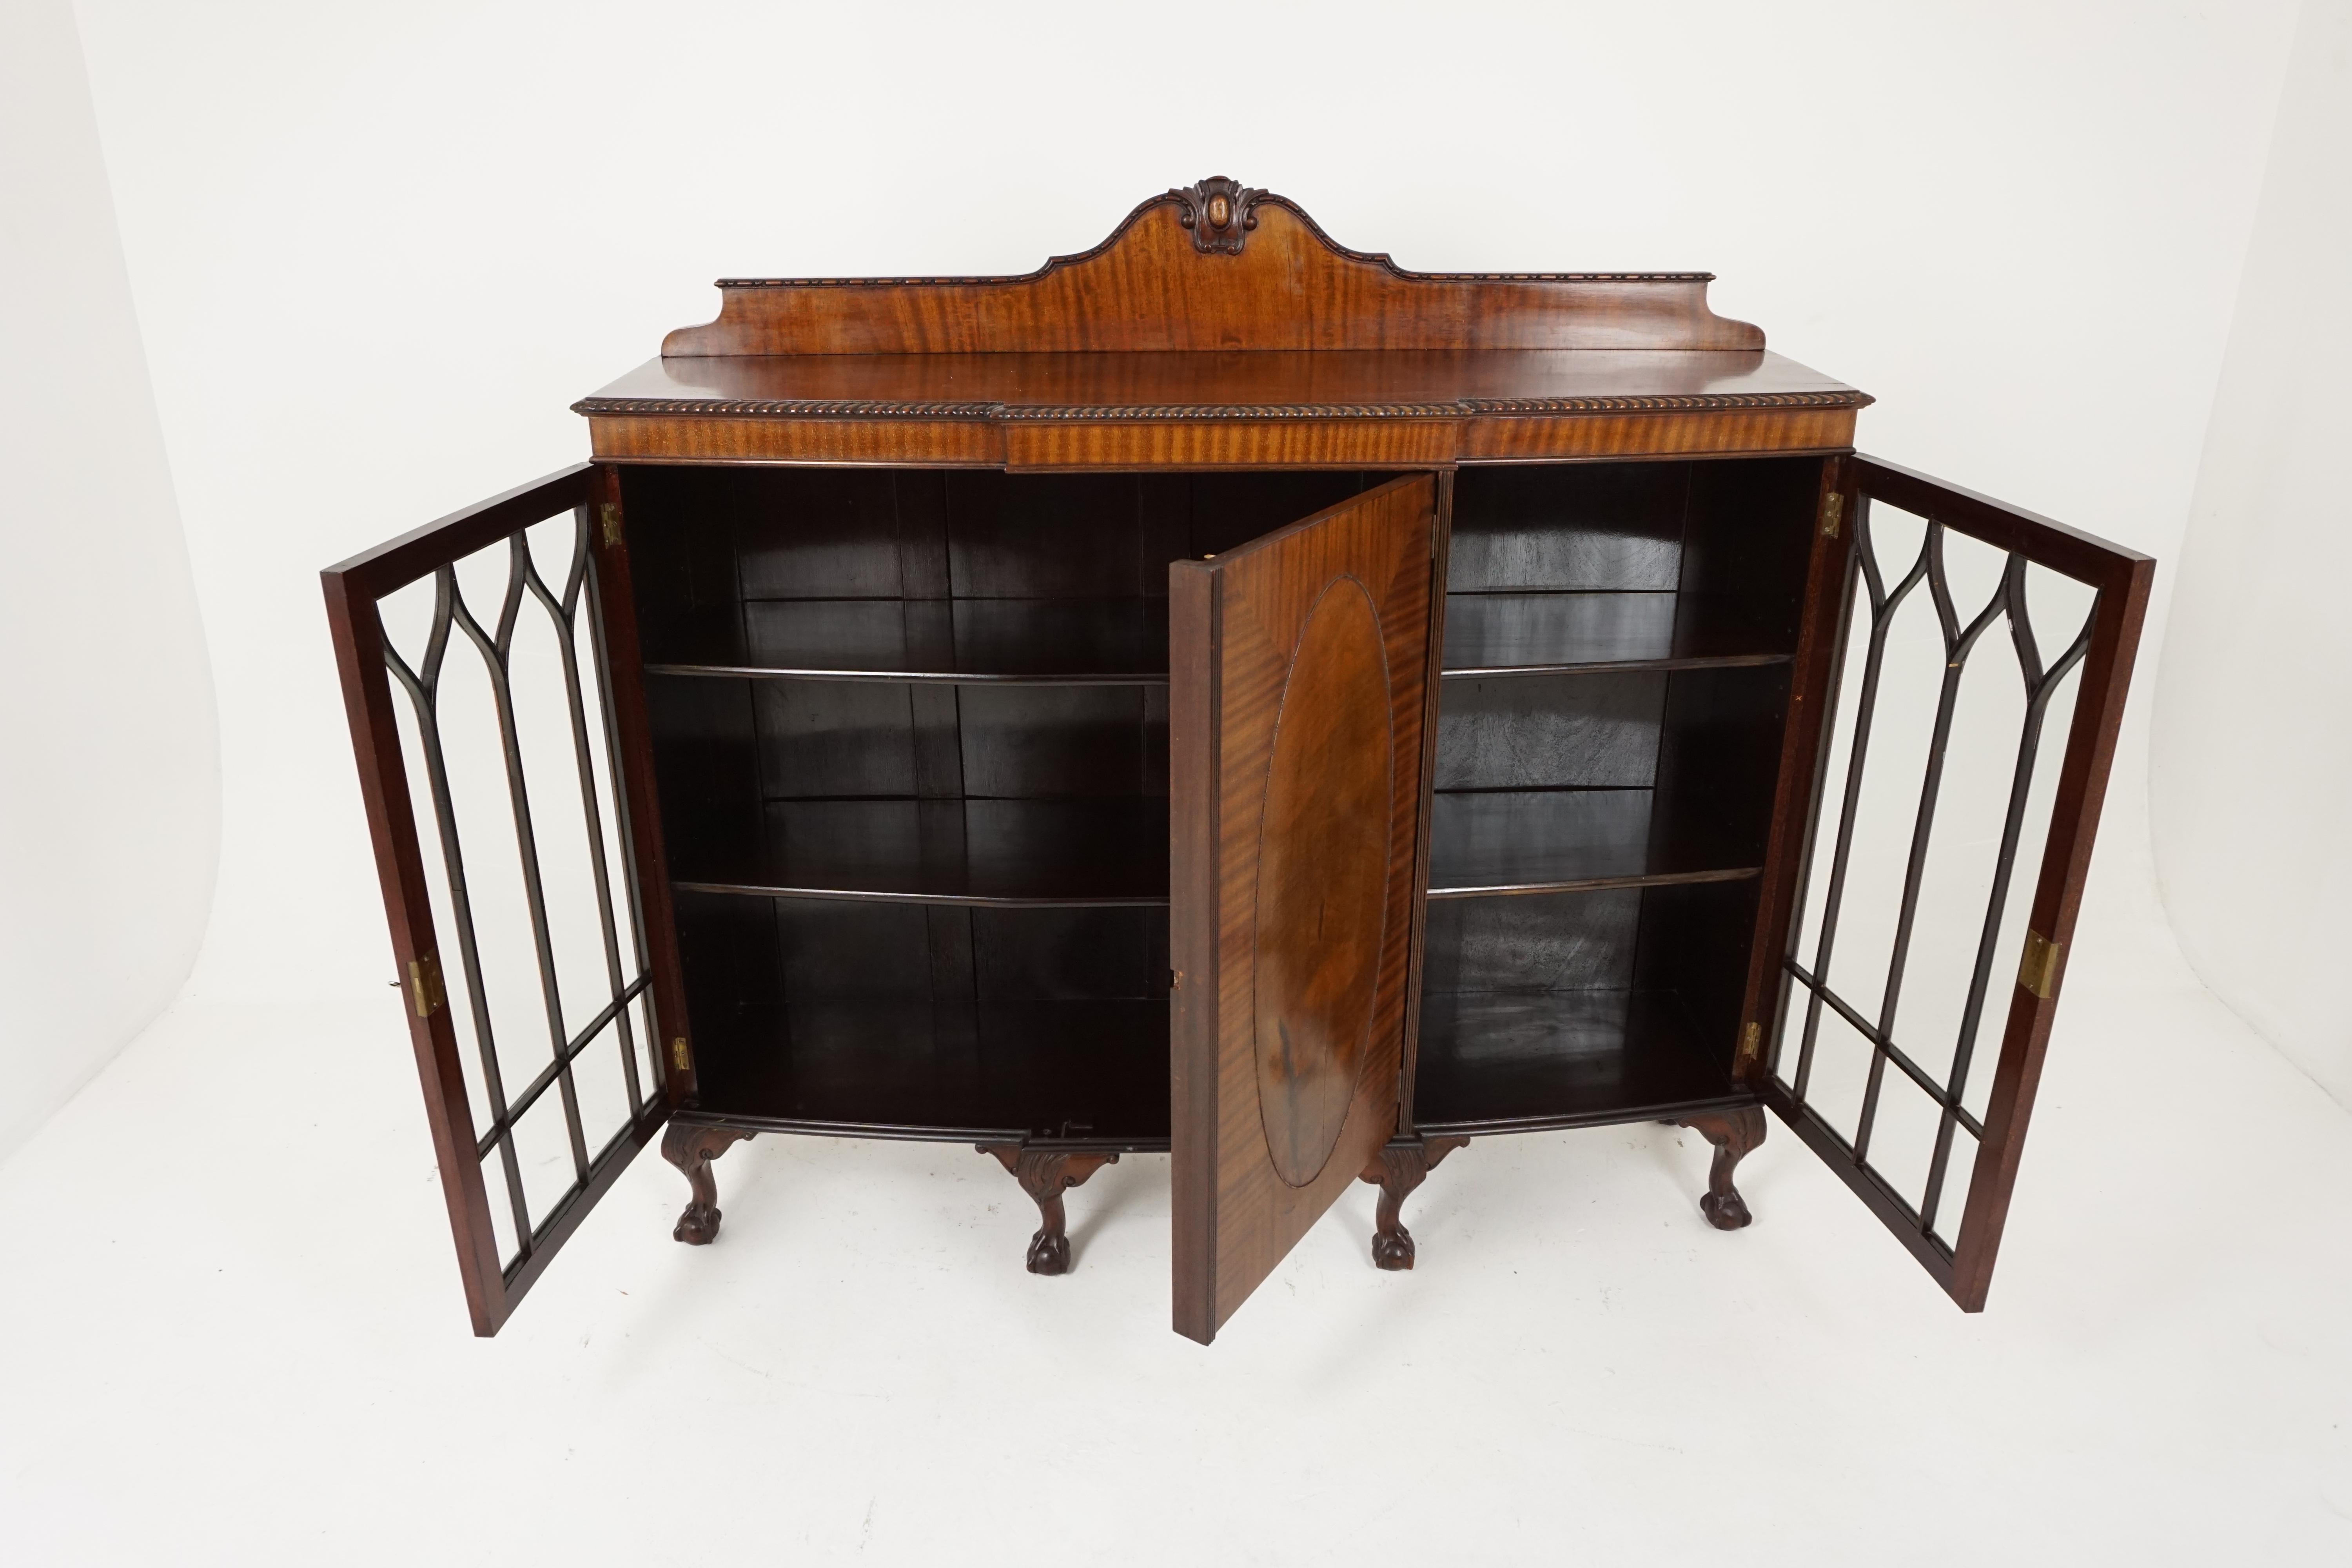 Antique bow front bookcase, walnut display cabinet, Antique Furniture, Scotland 1910, B1934

Scotland 1910
Solid Walnut and Veneer
Original Finish
Carved gallery at the back
Solid walnut top with carved edge detail
Underneath a center